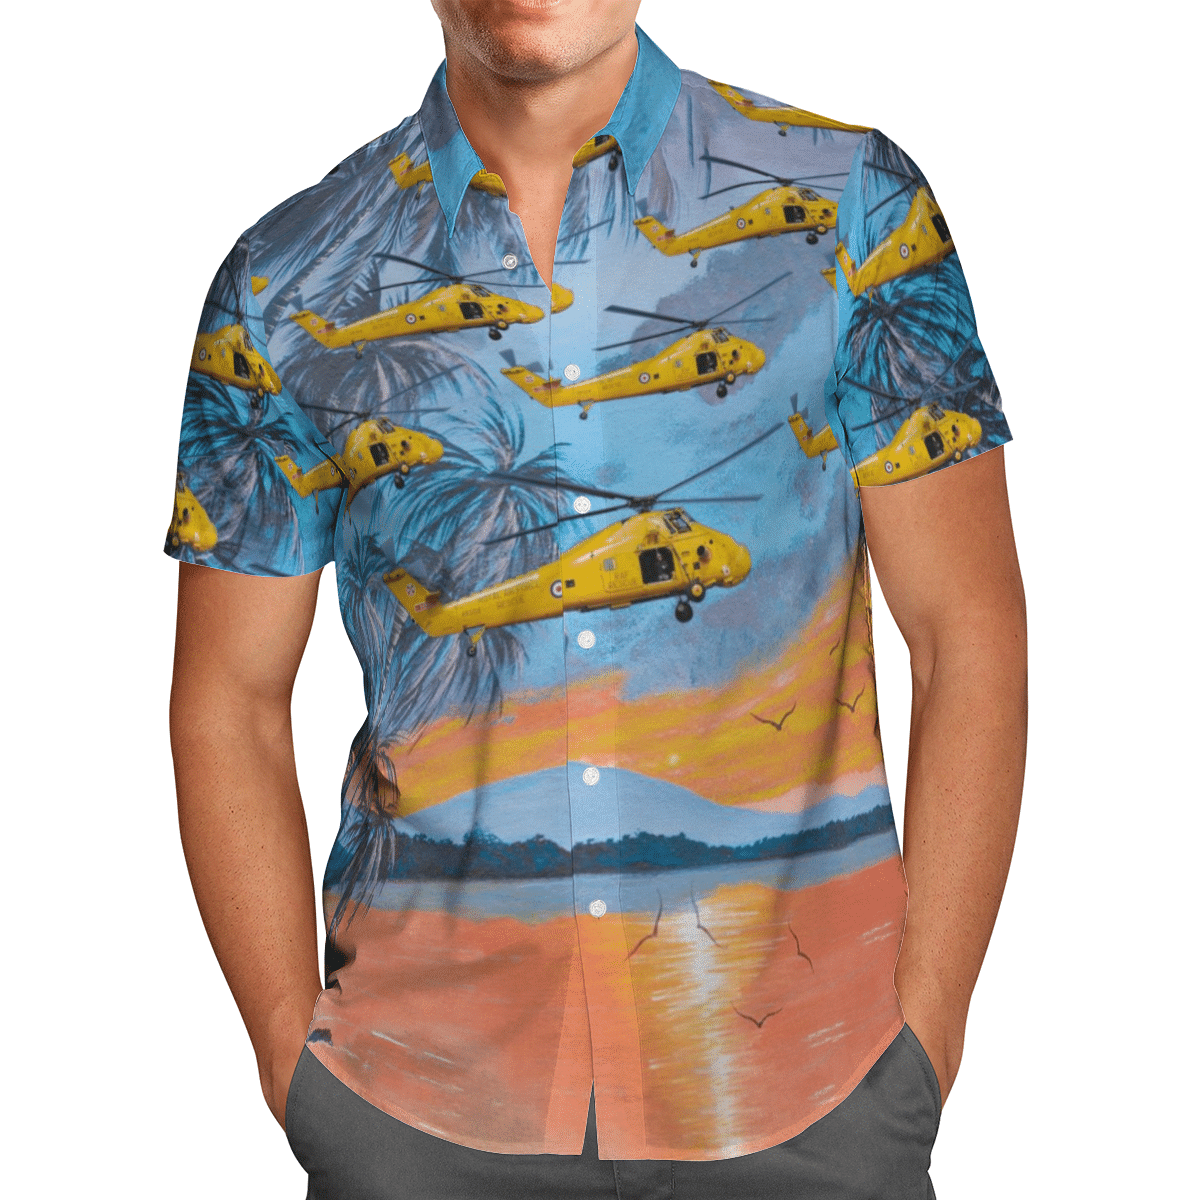 HOT Historical Westland Wessex Search And Rescue All Over Print Tropical Shirt1